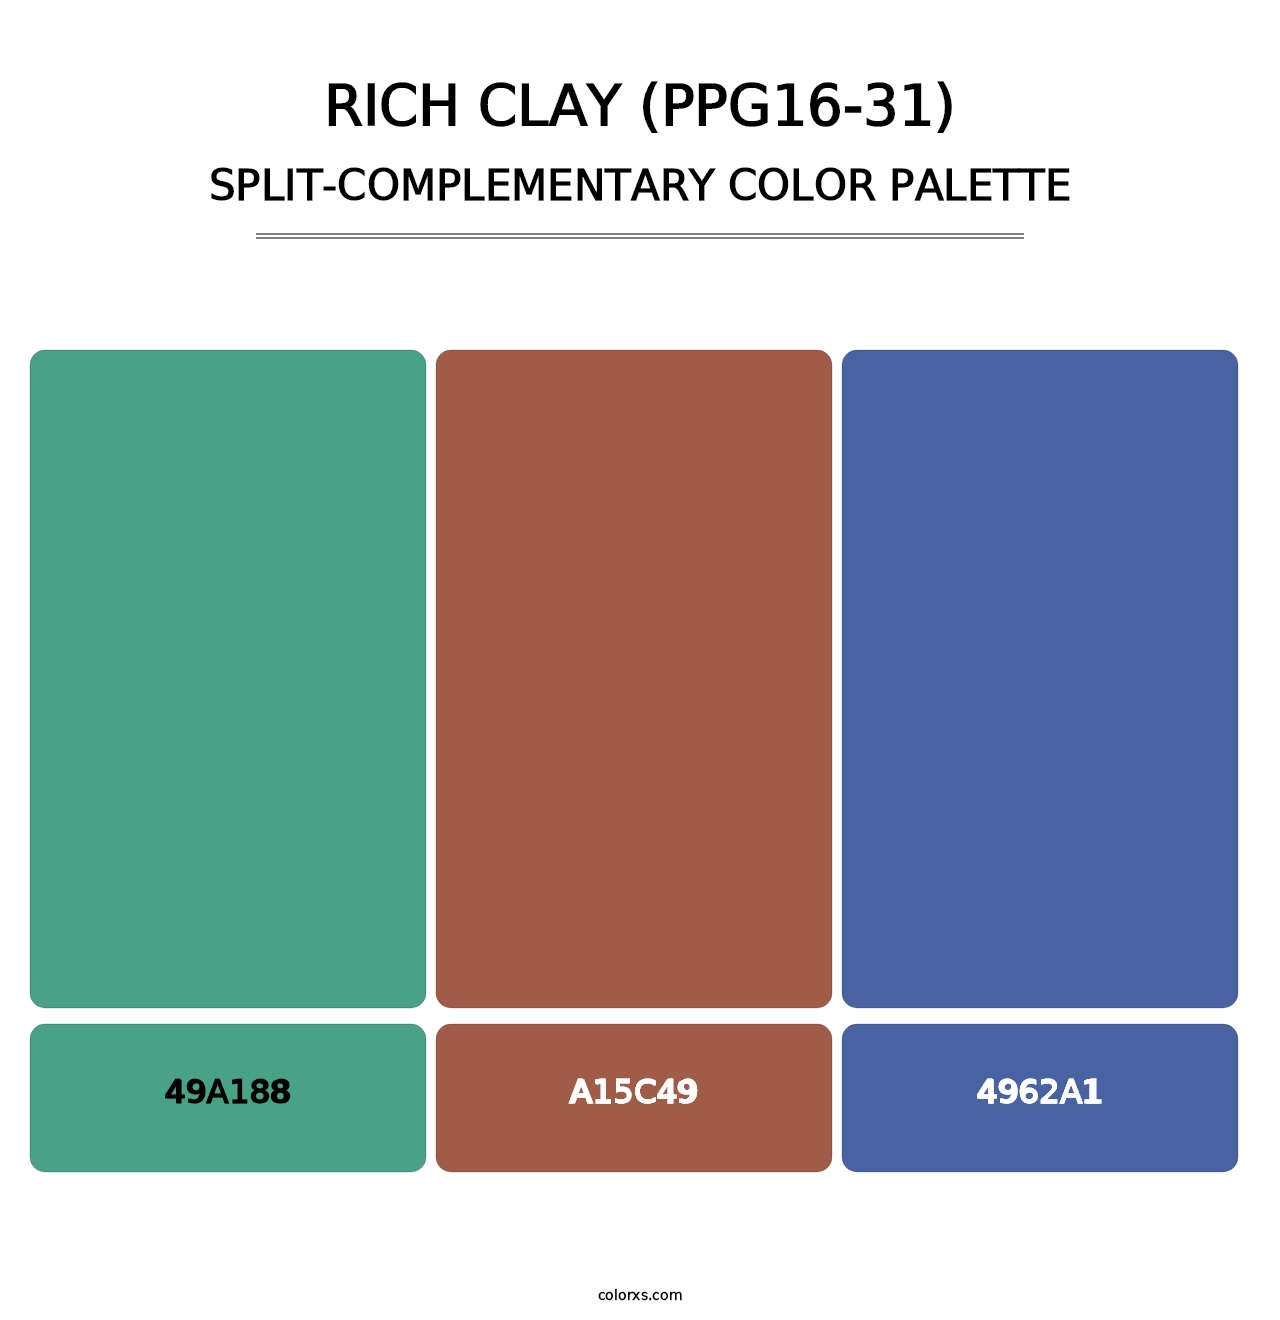 Rich Clay (PPG16-31) - Split-Complementary Color Palette